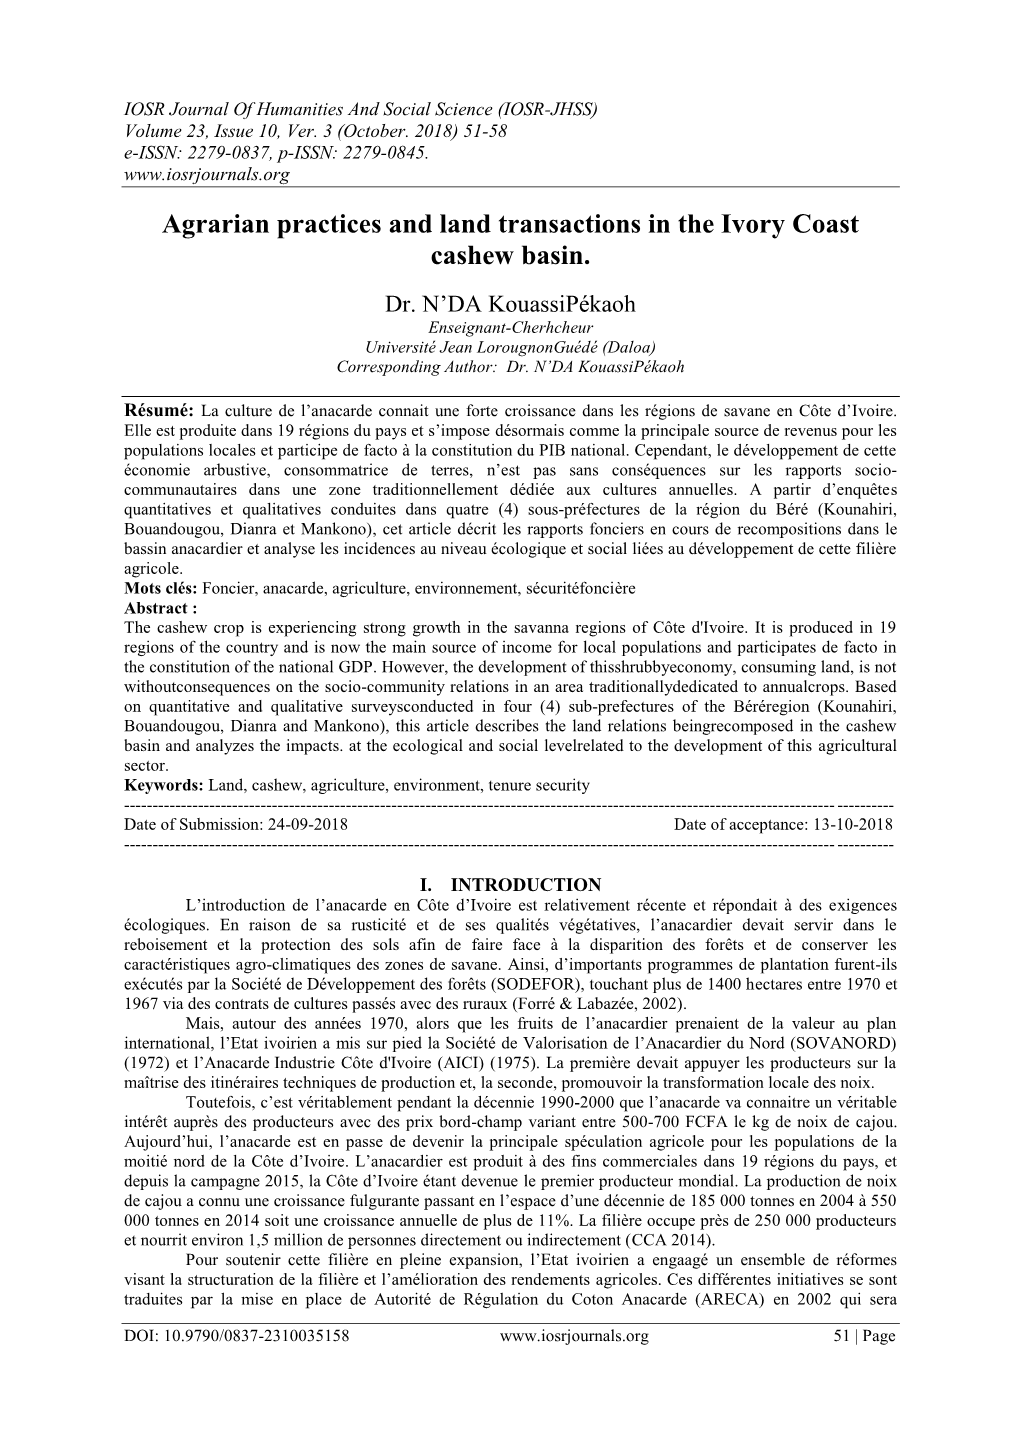 Agrarian Practices and Land Transactions in the Ivory Coast Cashew Basin